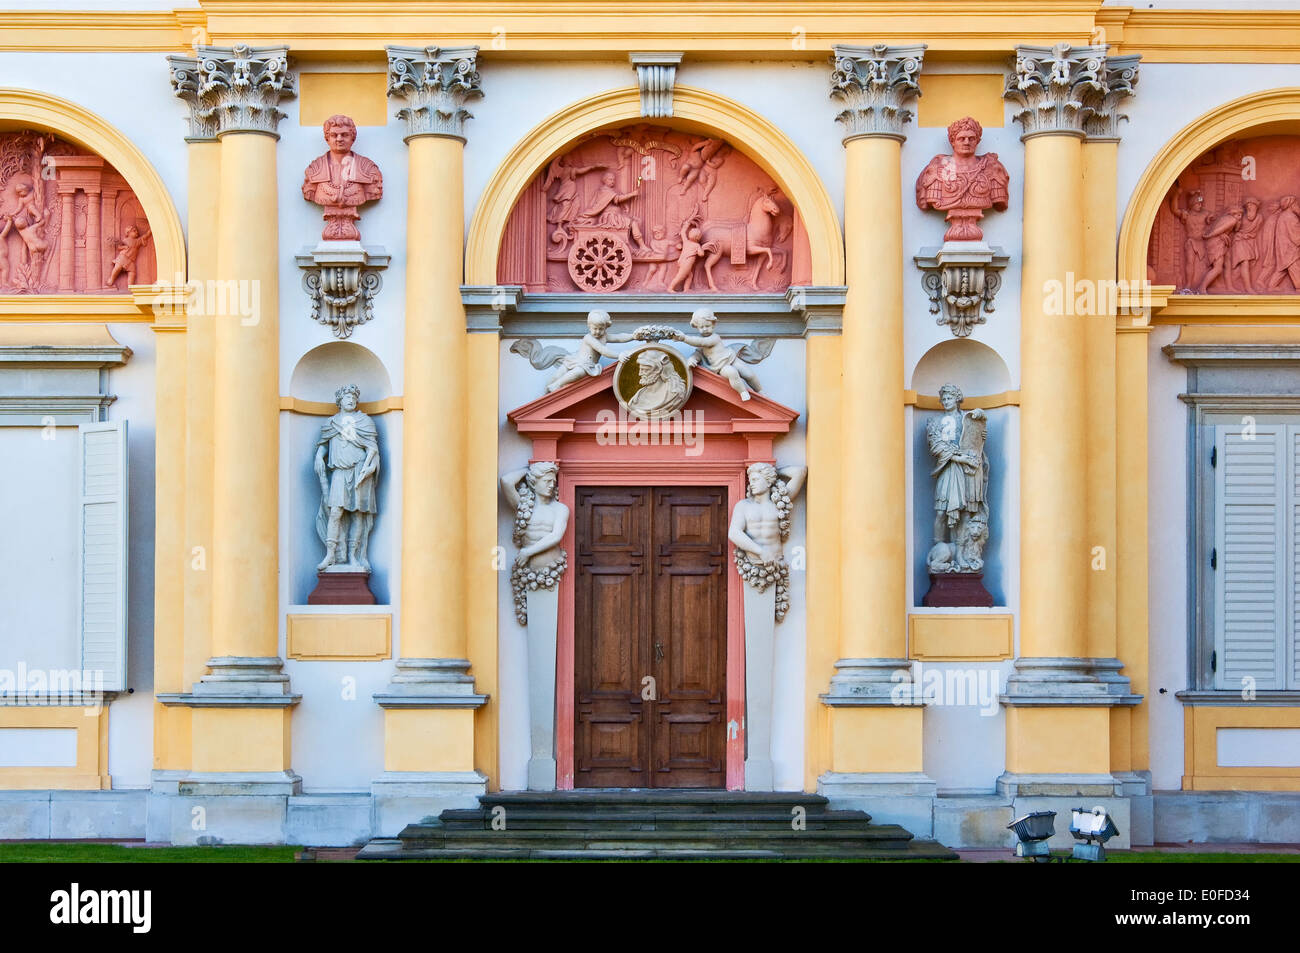 Bas reliefs, sculptures and pilasters at main building entrance at Wilanów Palace in Warsaw, Poland Stock Photo